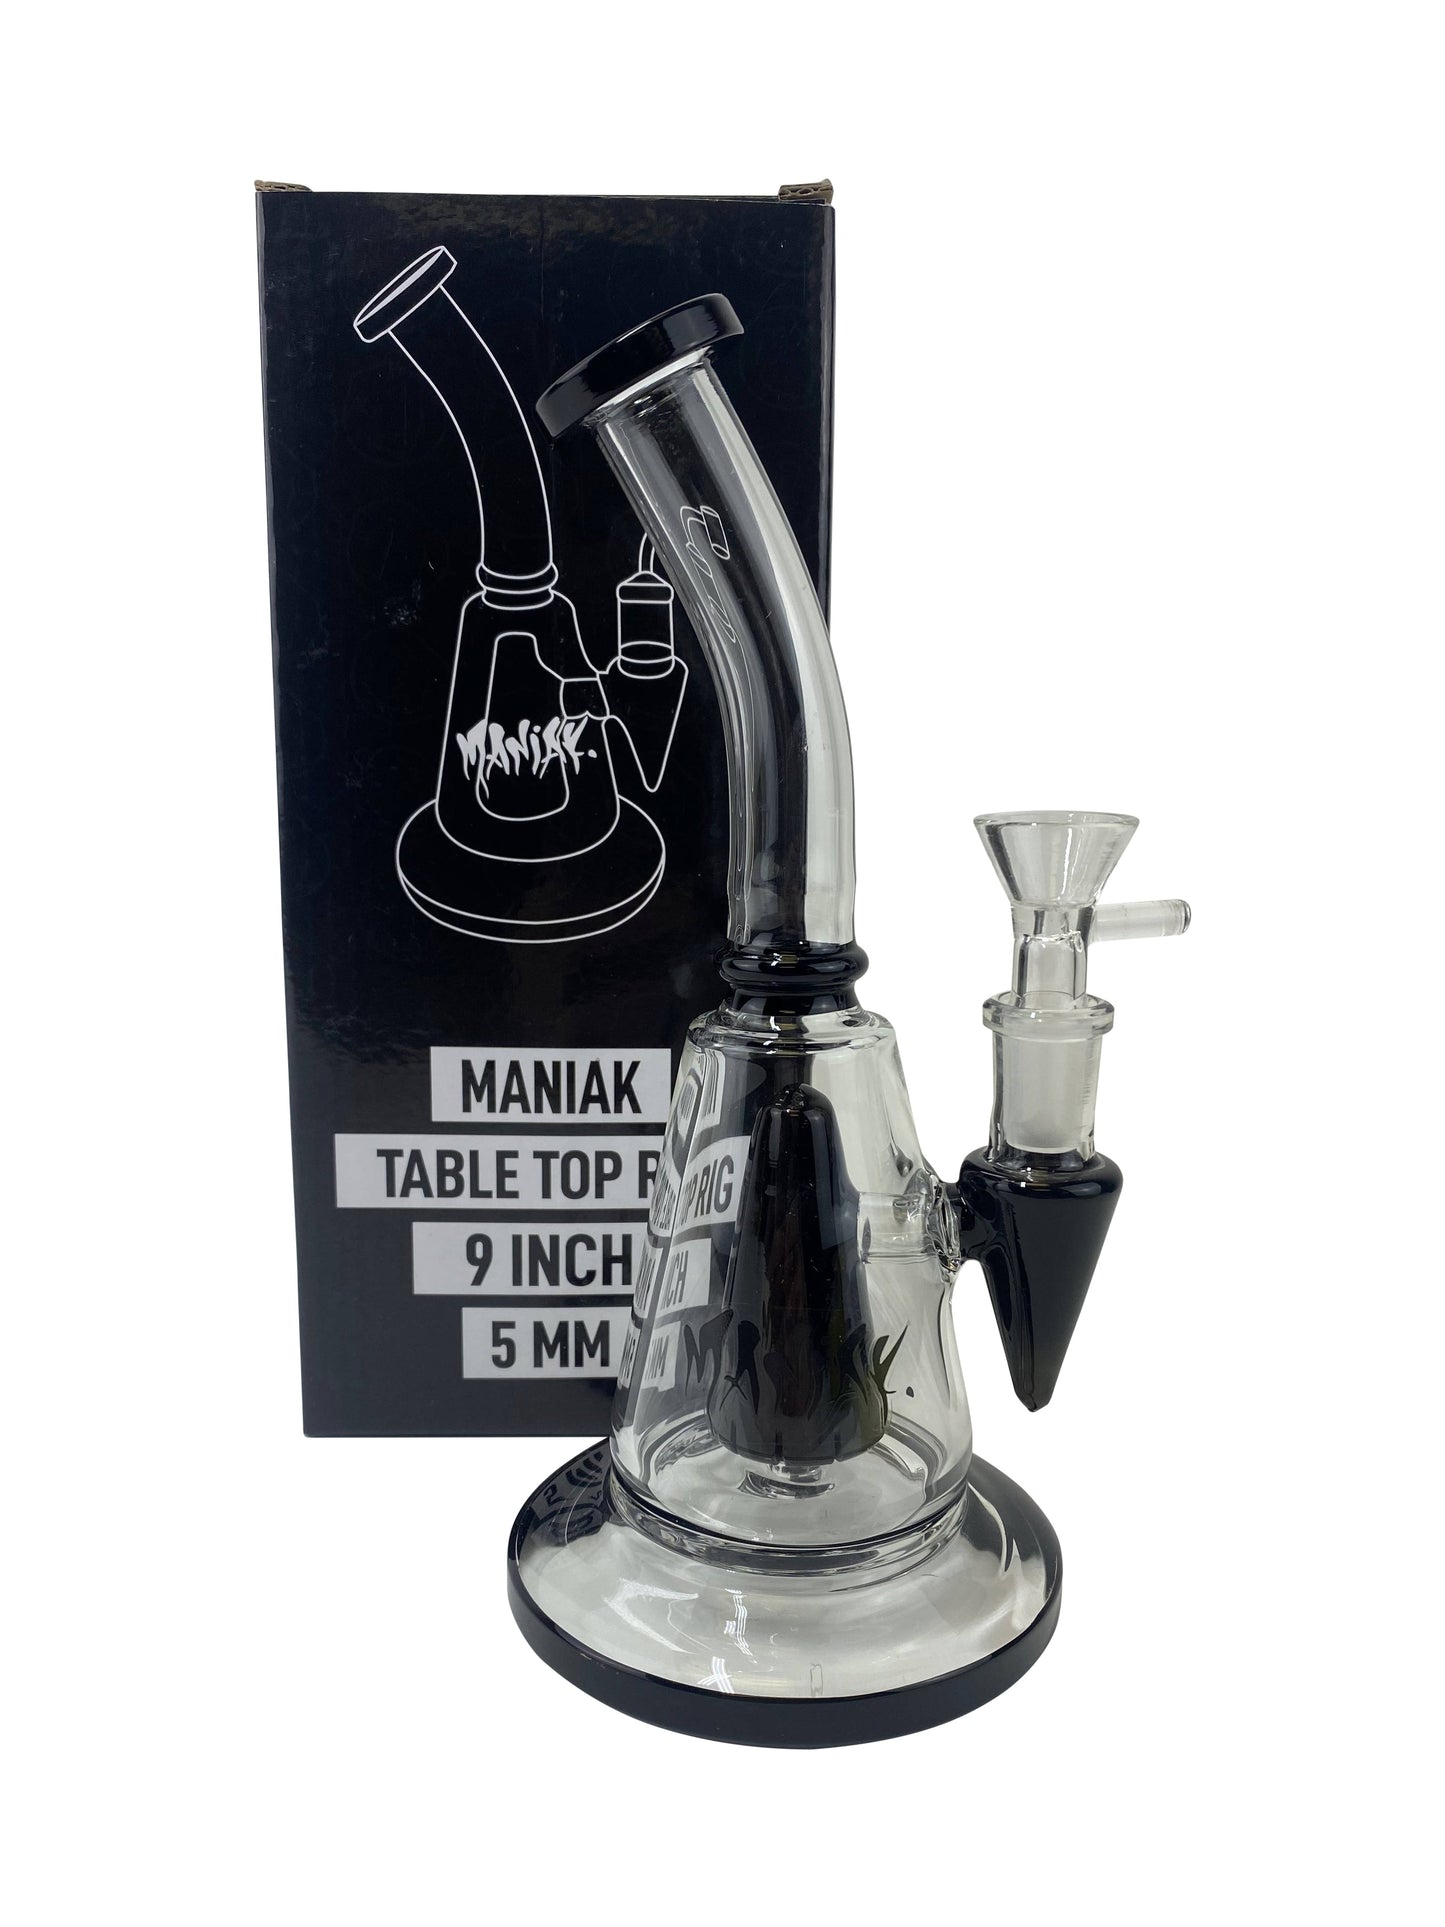 Maniak - Table Top Rig - Glass